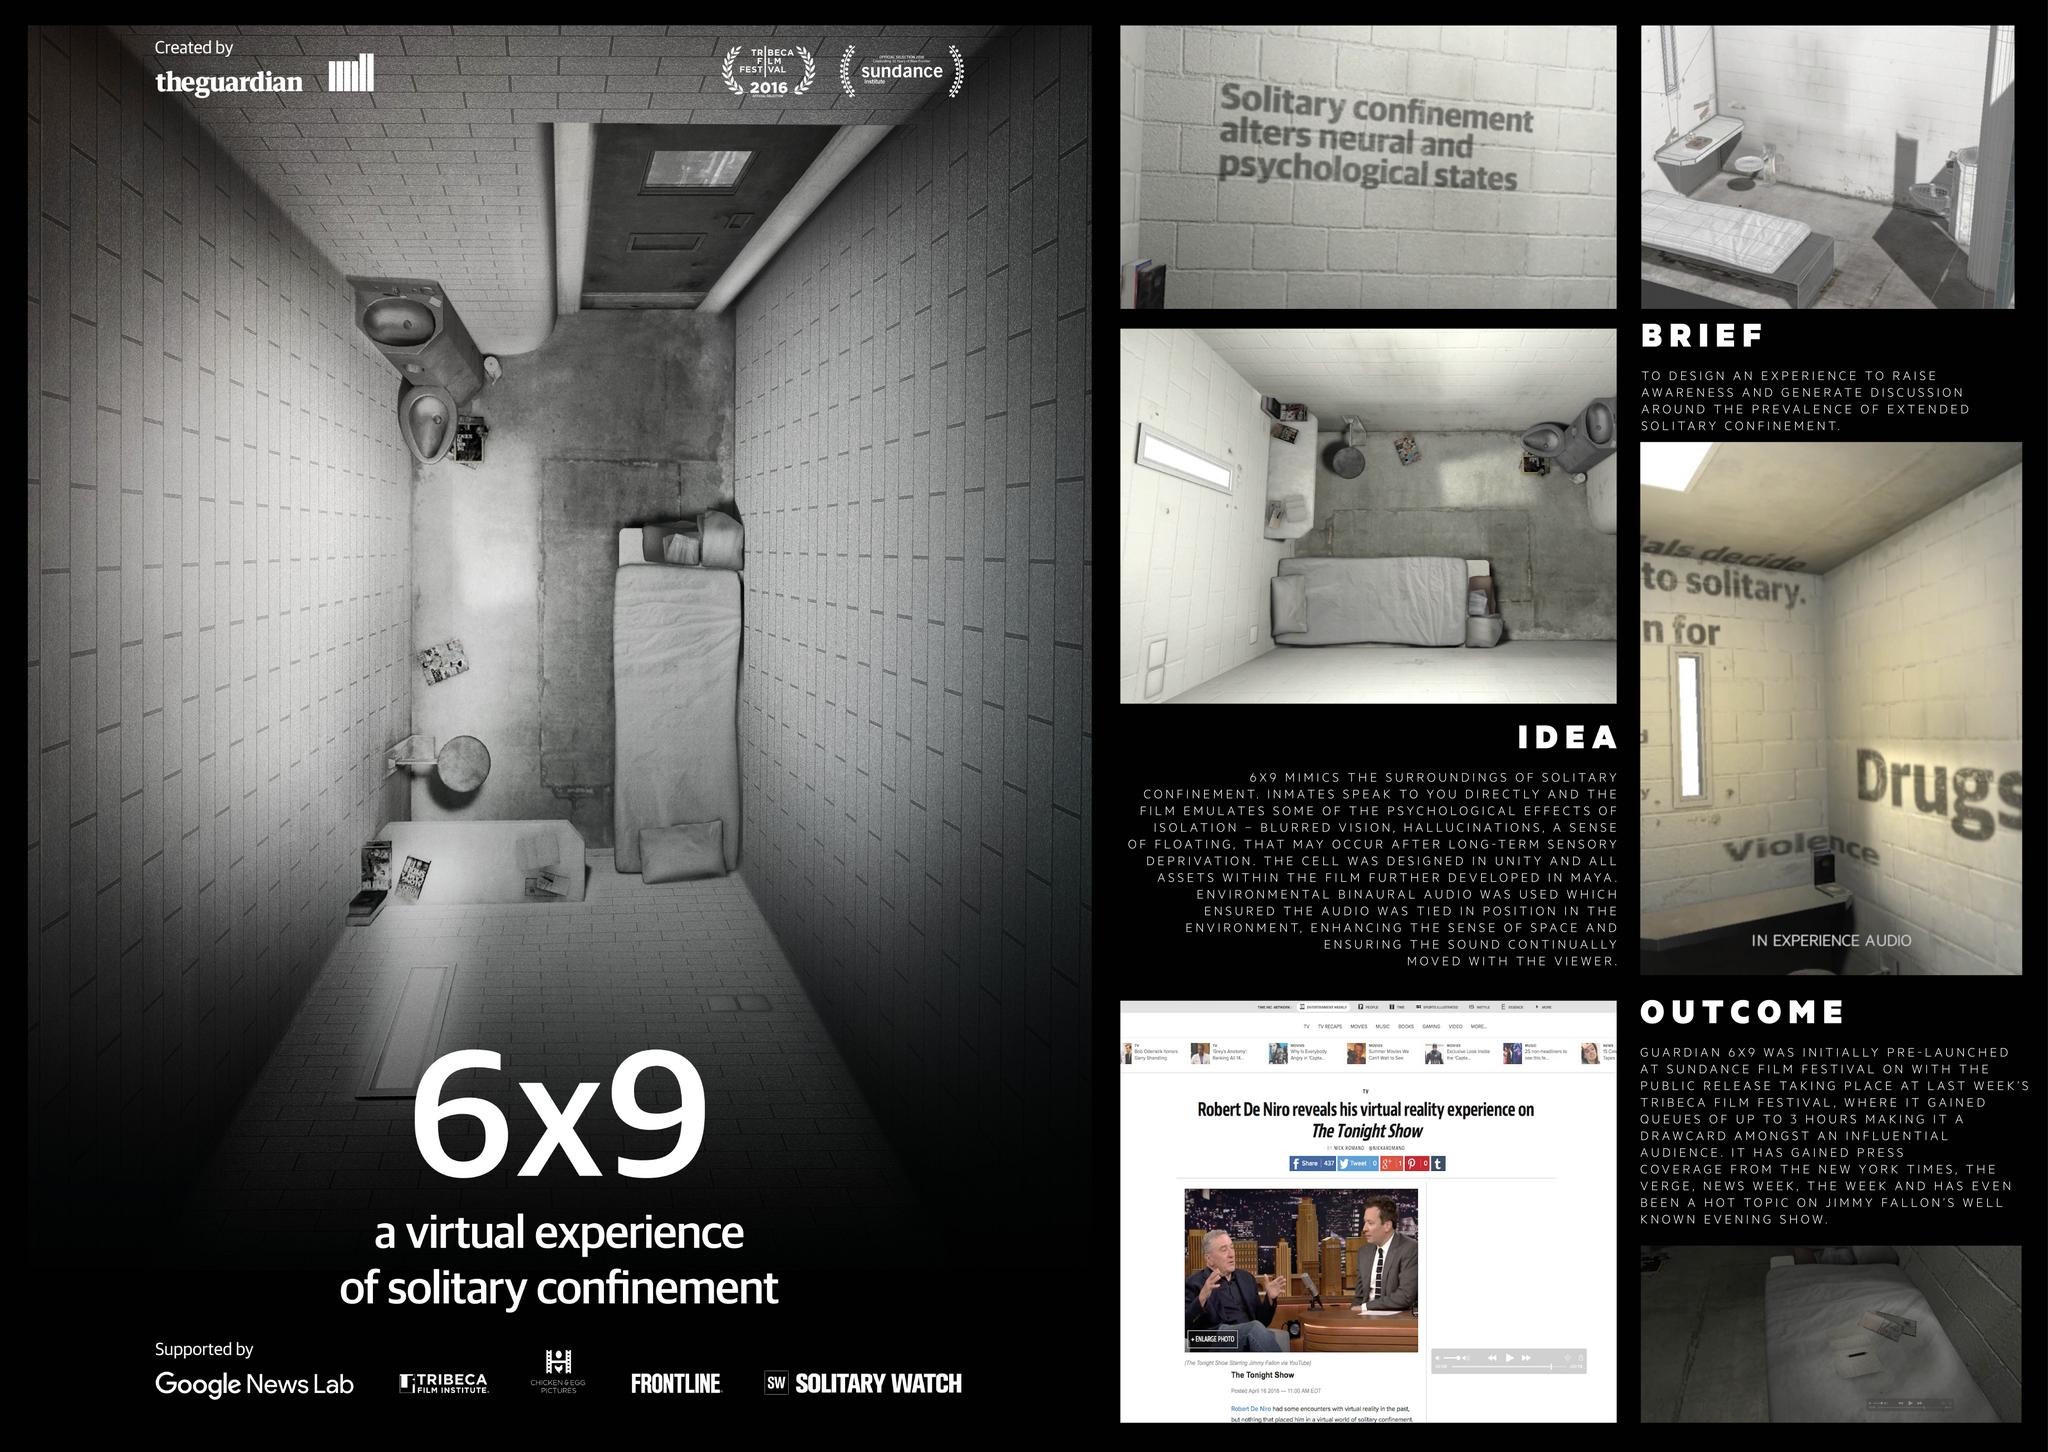 6X9 (A VIRTUAL EXPERIENCE OF SOLITARY CONFINEMENT)